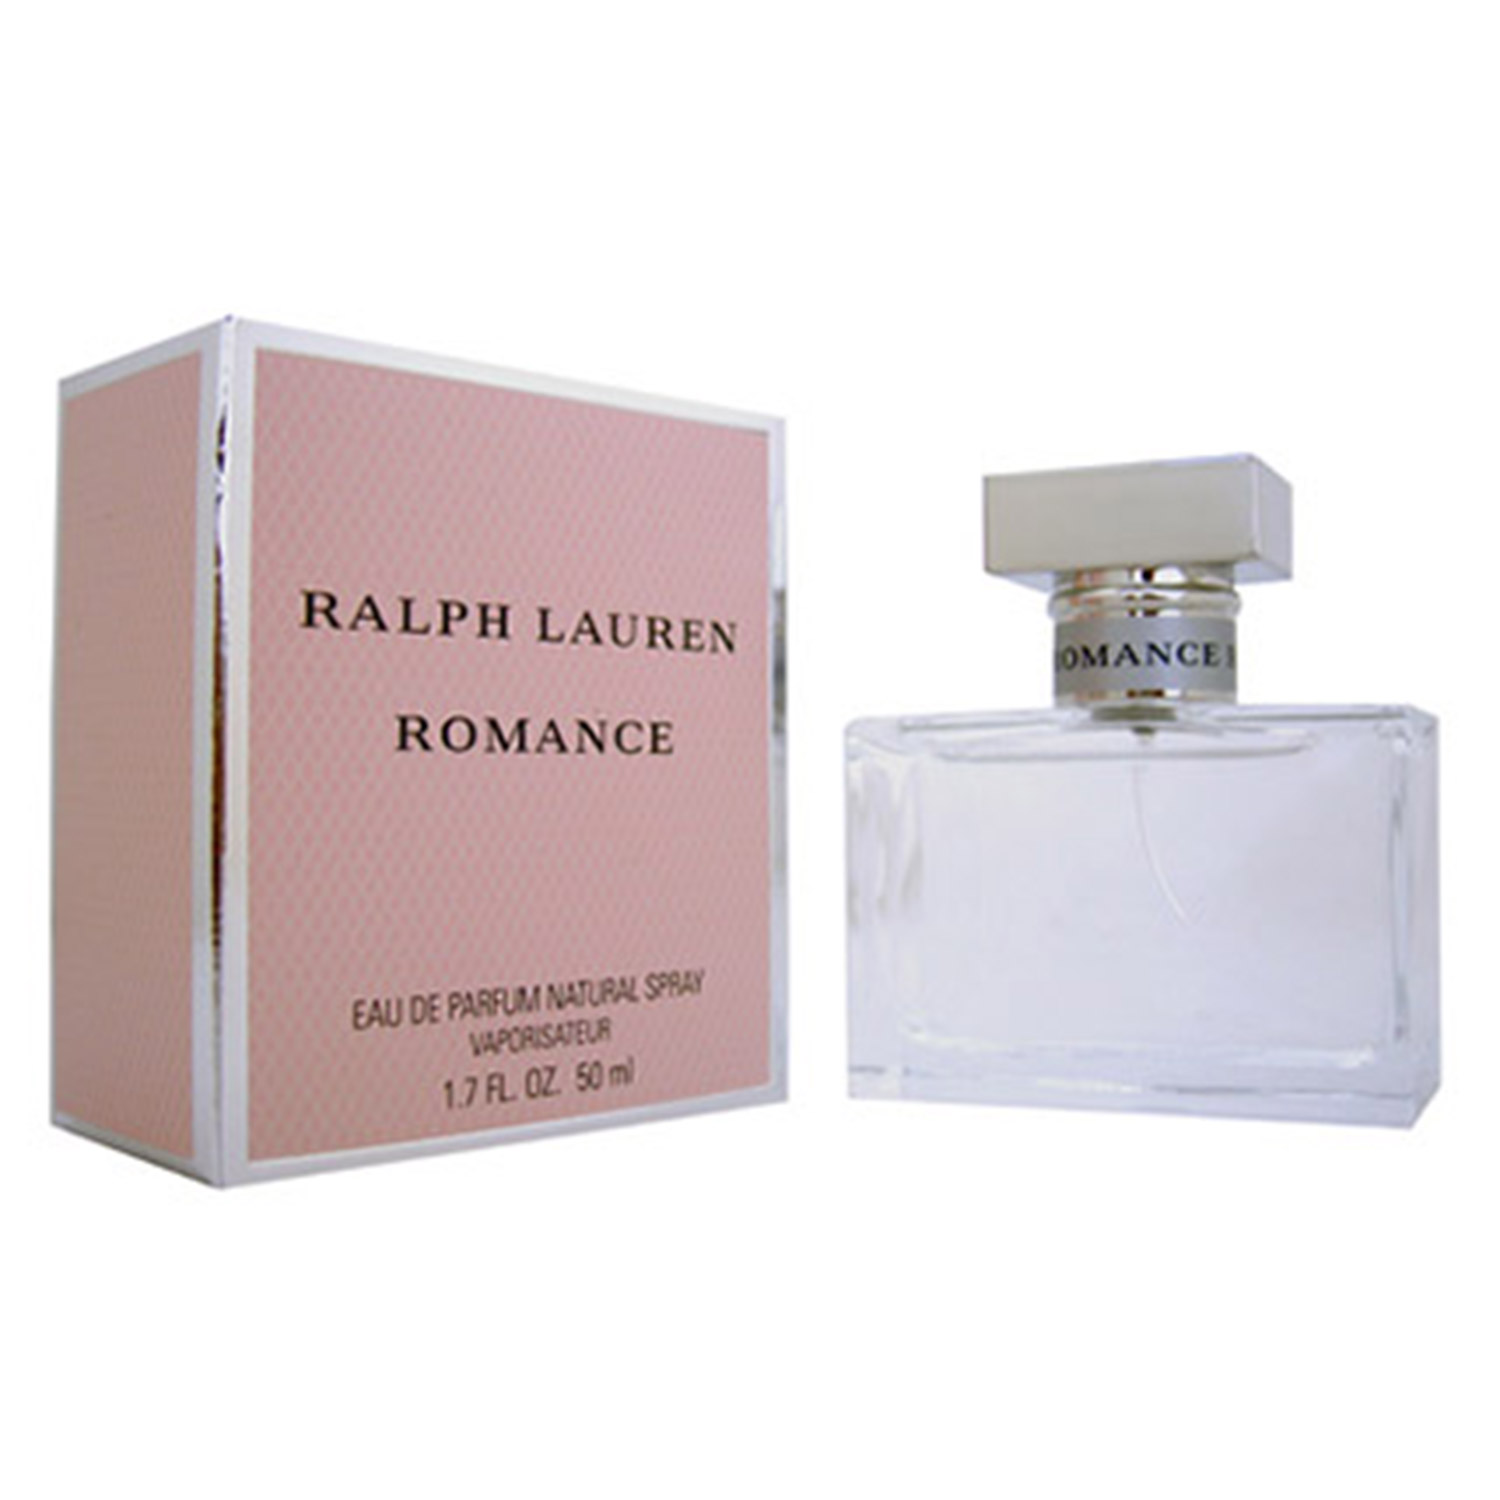 Online Romance By Ralph Lauren For Women Gift Delivery in Singapore - FNP